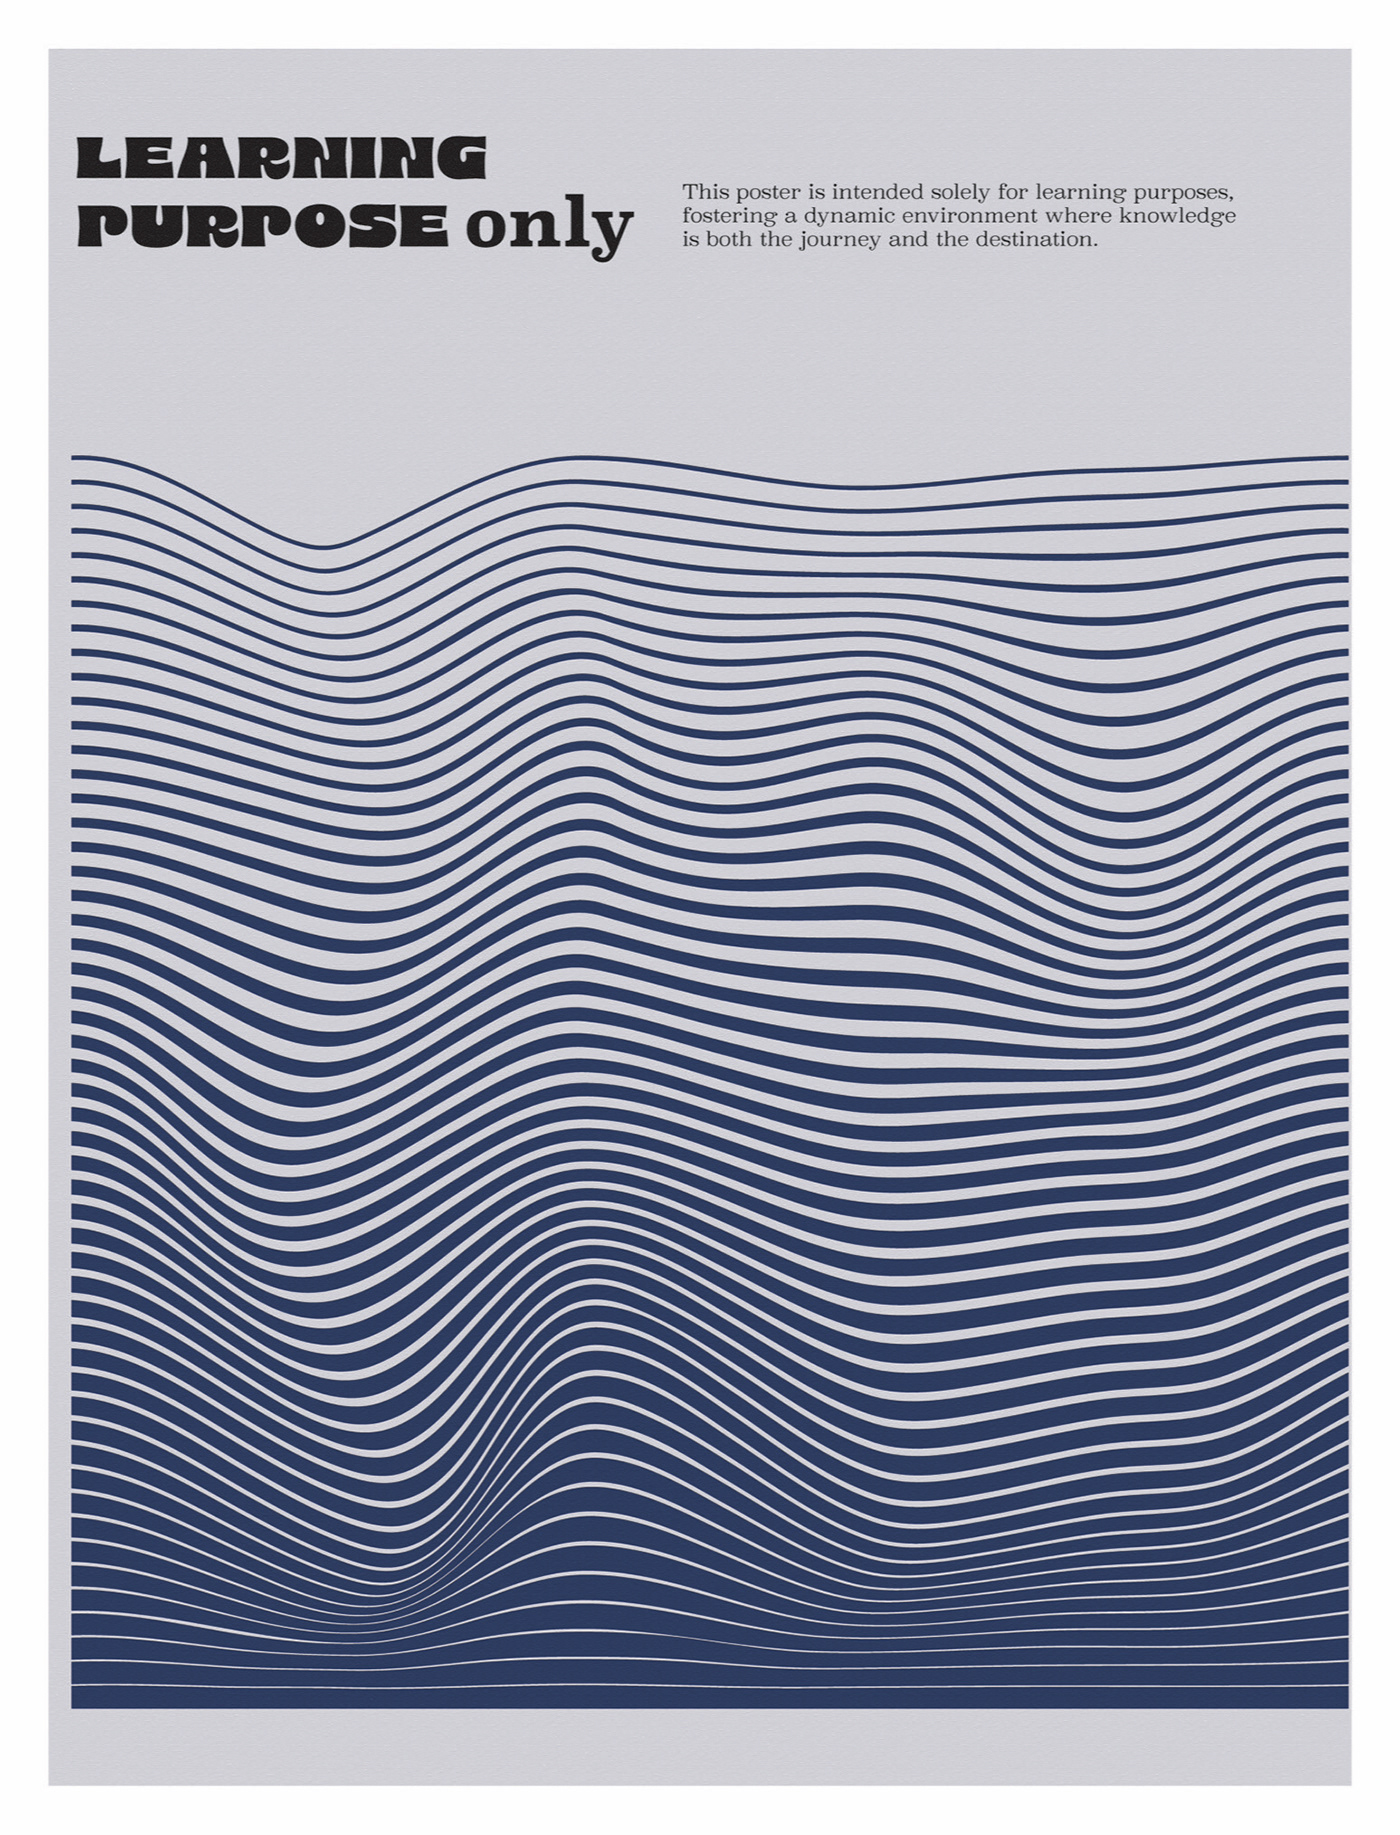 Abstract poster featuring curved lines designed for educational use.